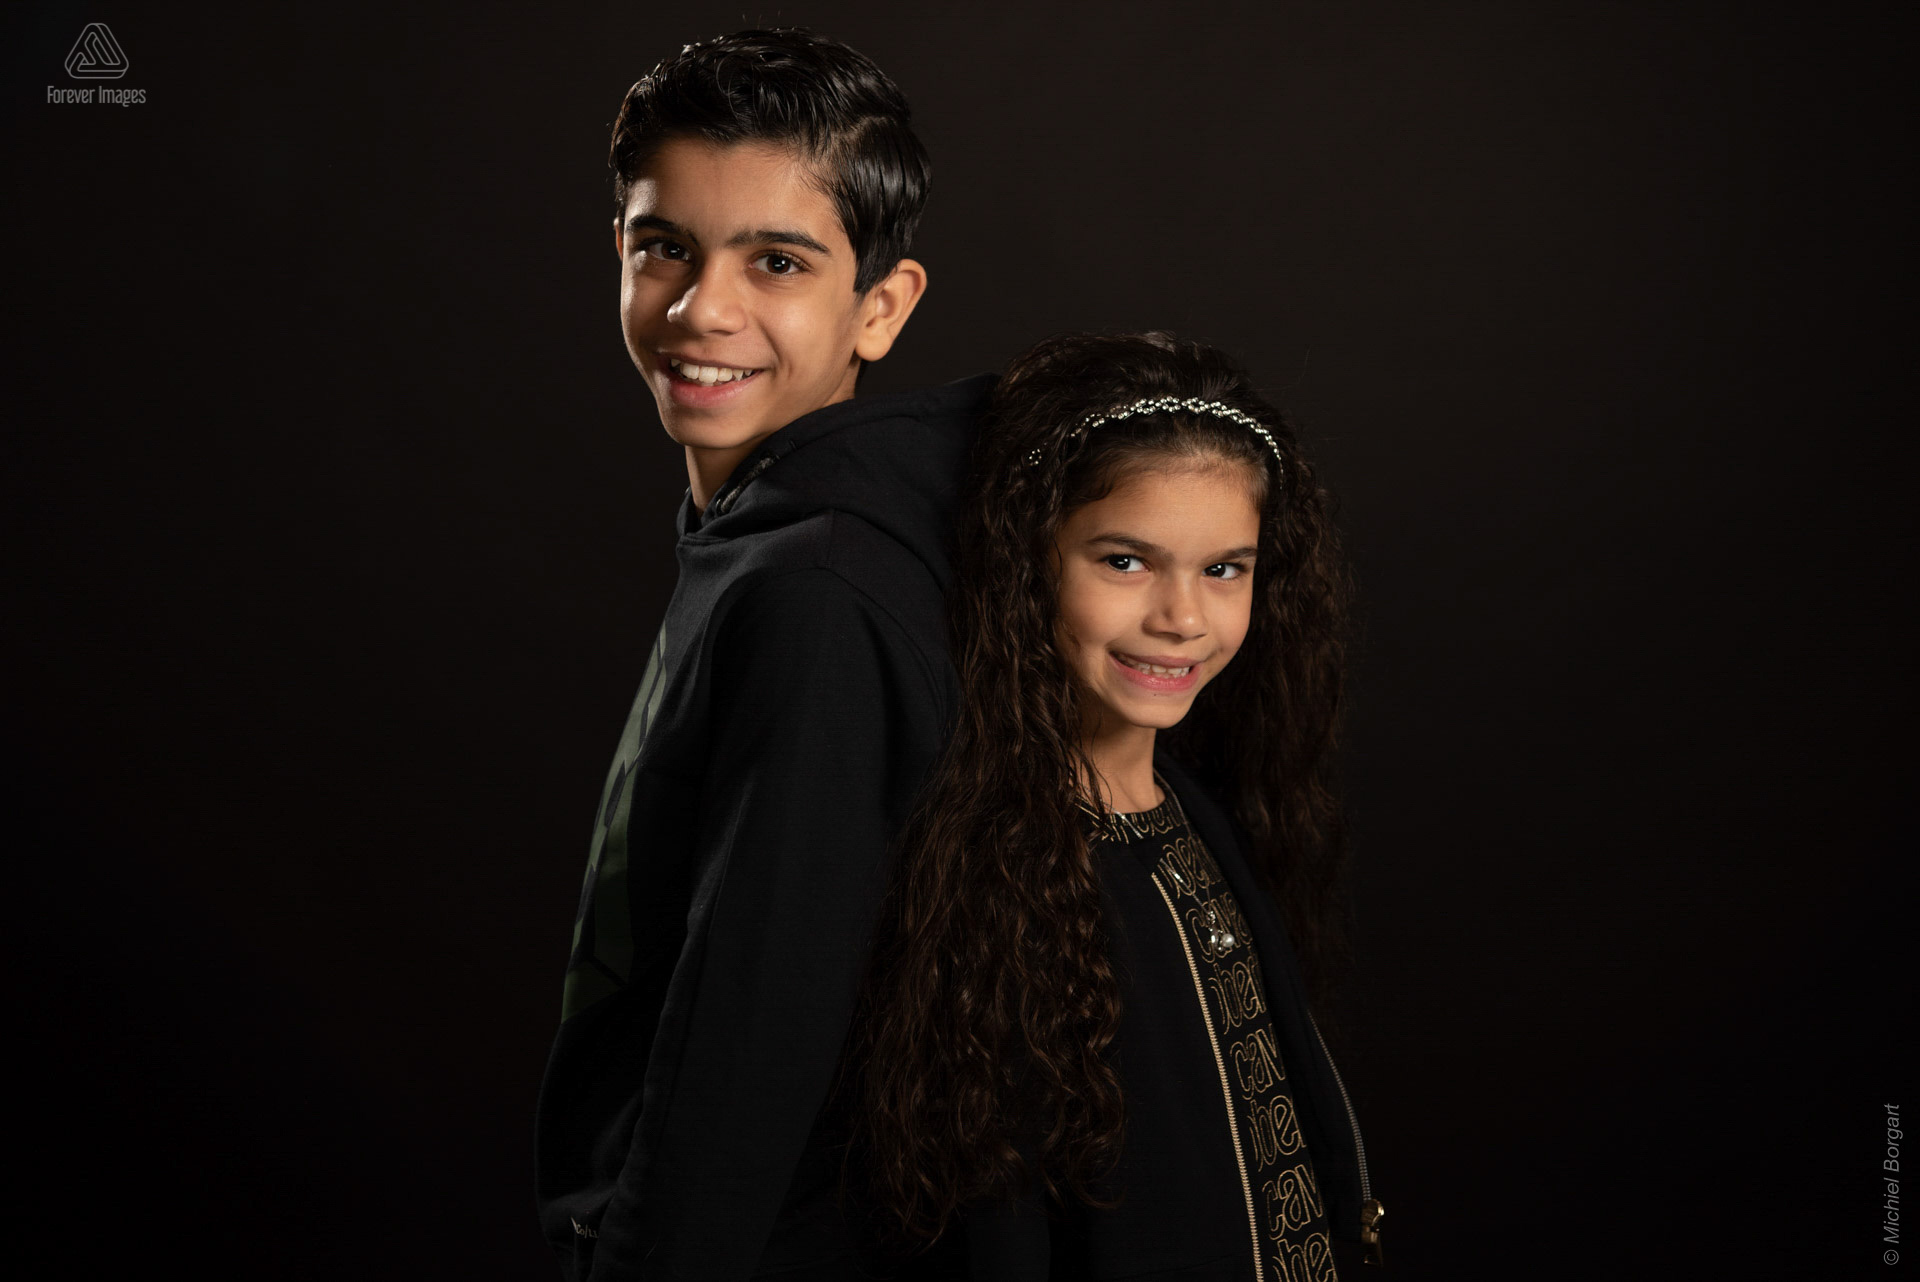 Portrait photo childern brother and sister back to back | Chhaya Noam Grishaver | Portrait Photographer Michiel Borgart - Forever Images.